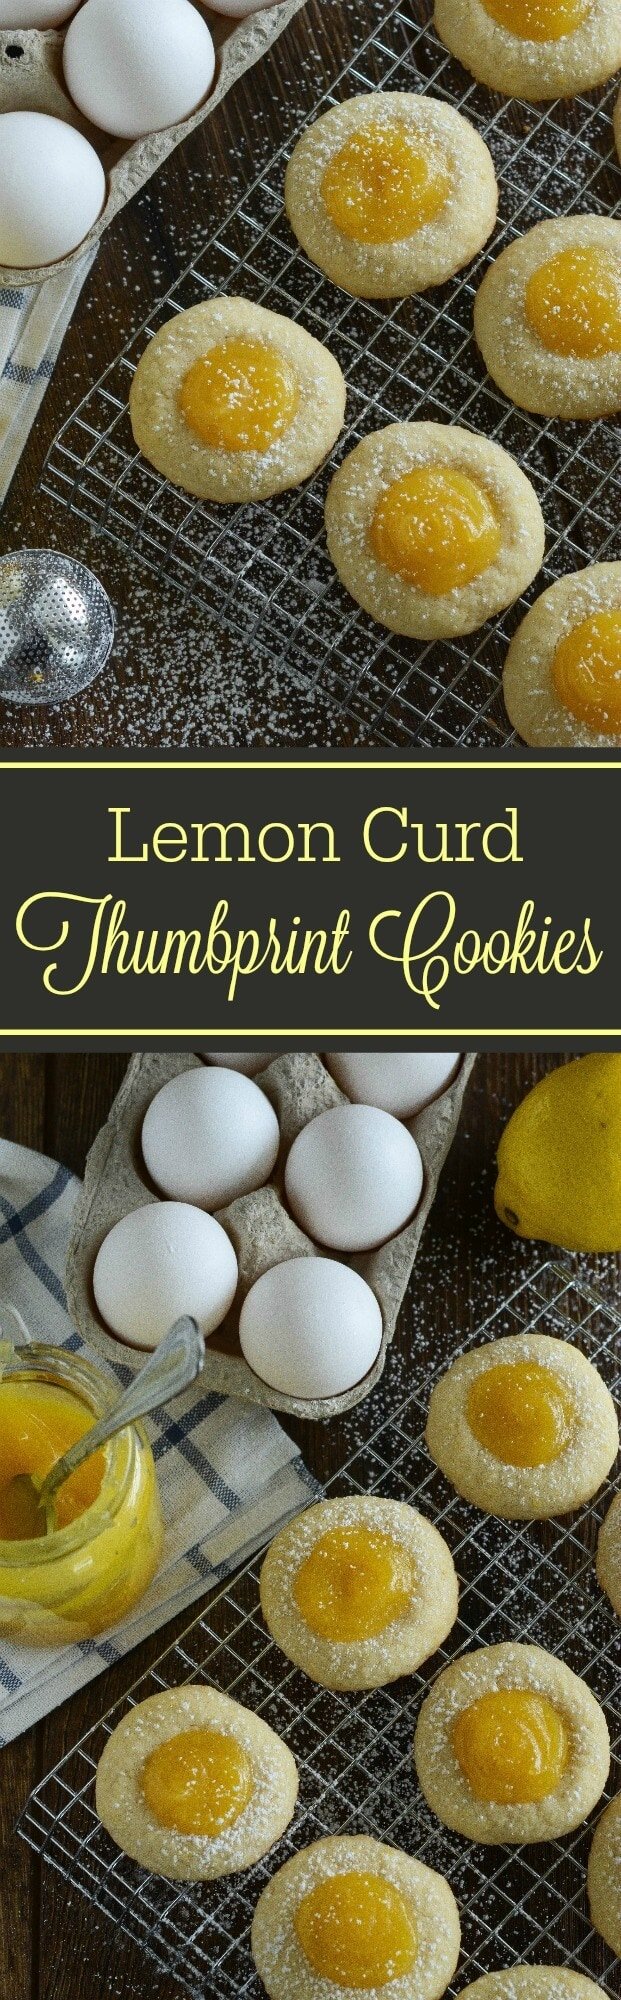 A Collage of Images of Lemon Thumbprint Cookies on a Cooling Rack